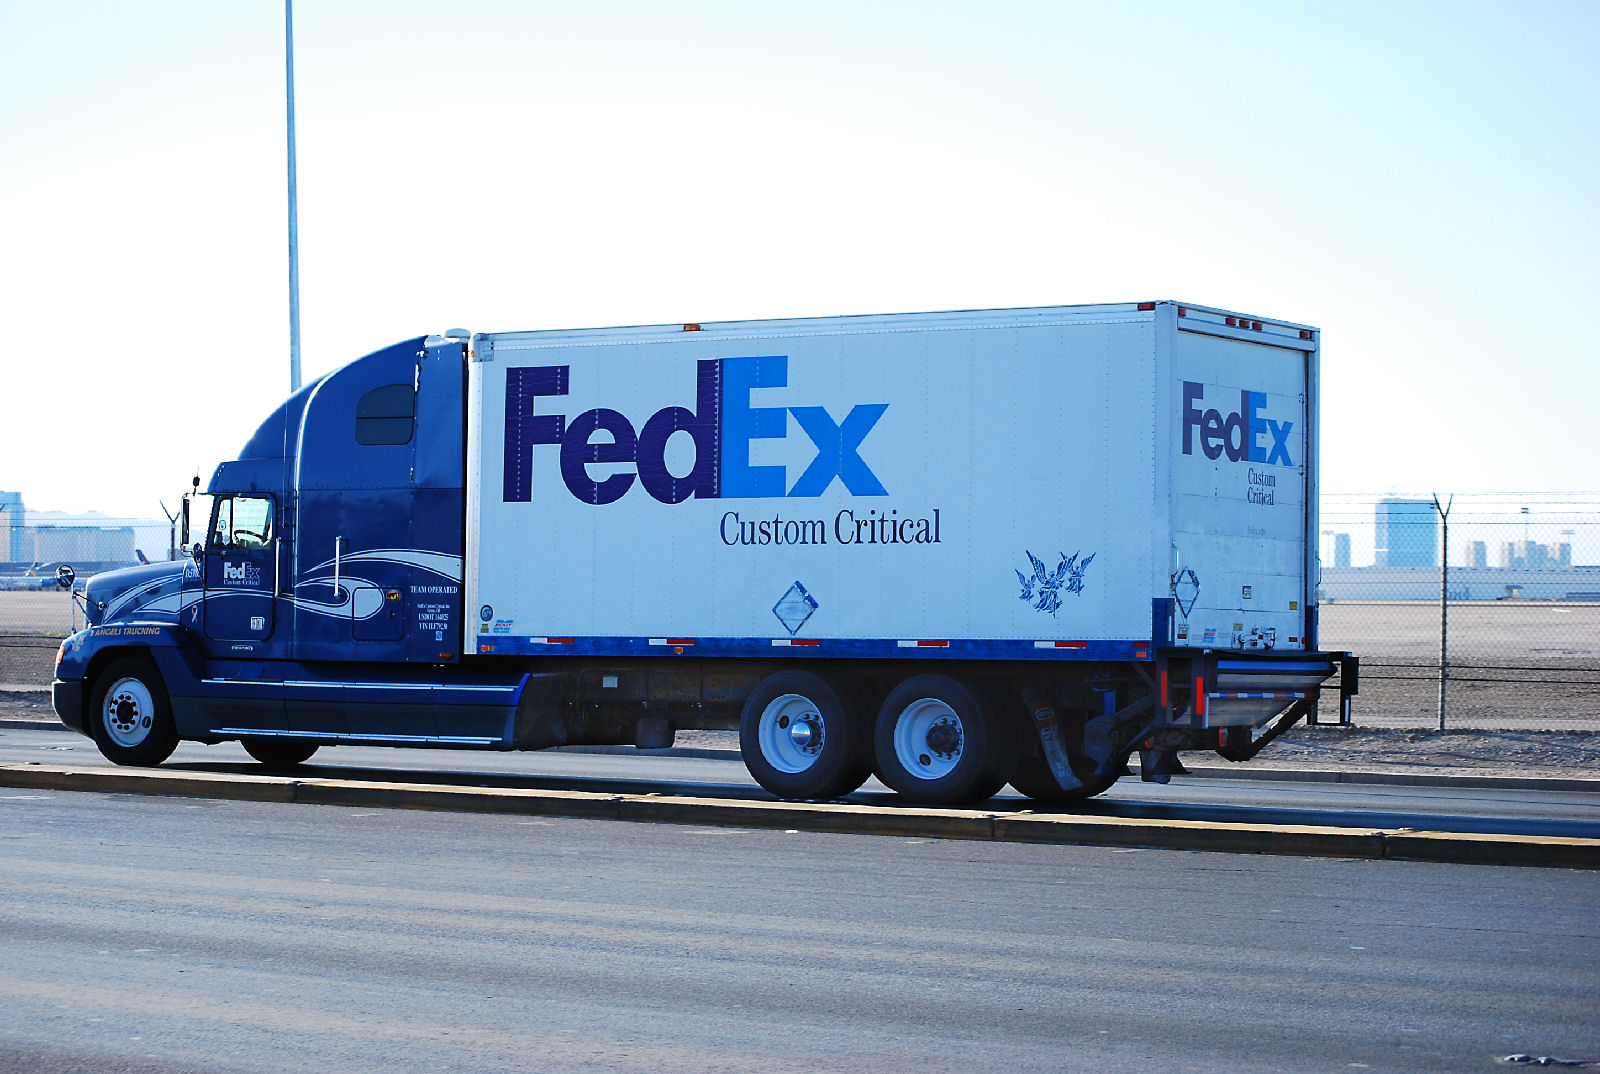 That Scania S450 reminds me of the FedEx Custom Critical trucks we see in t...